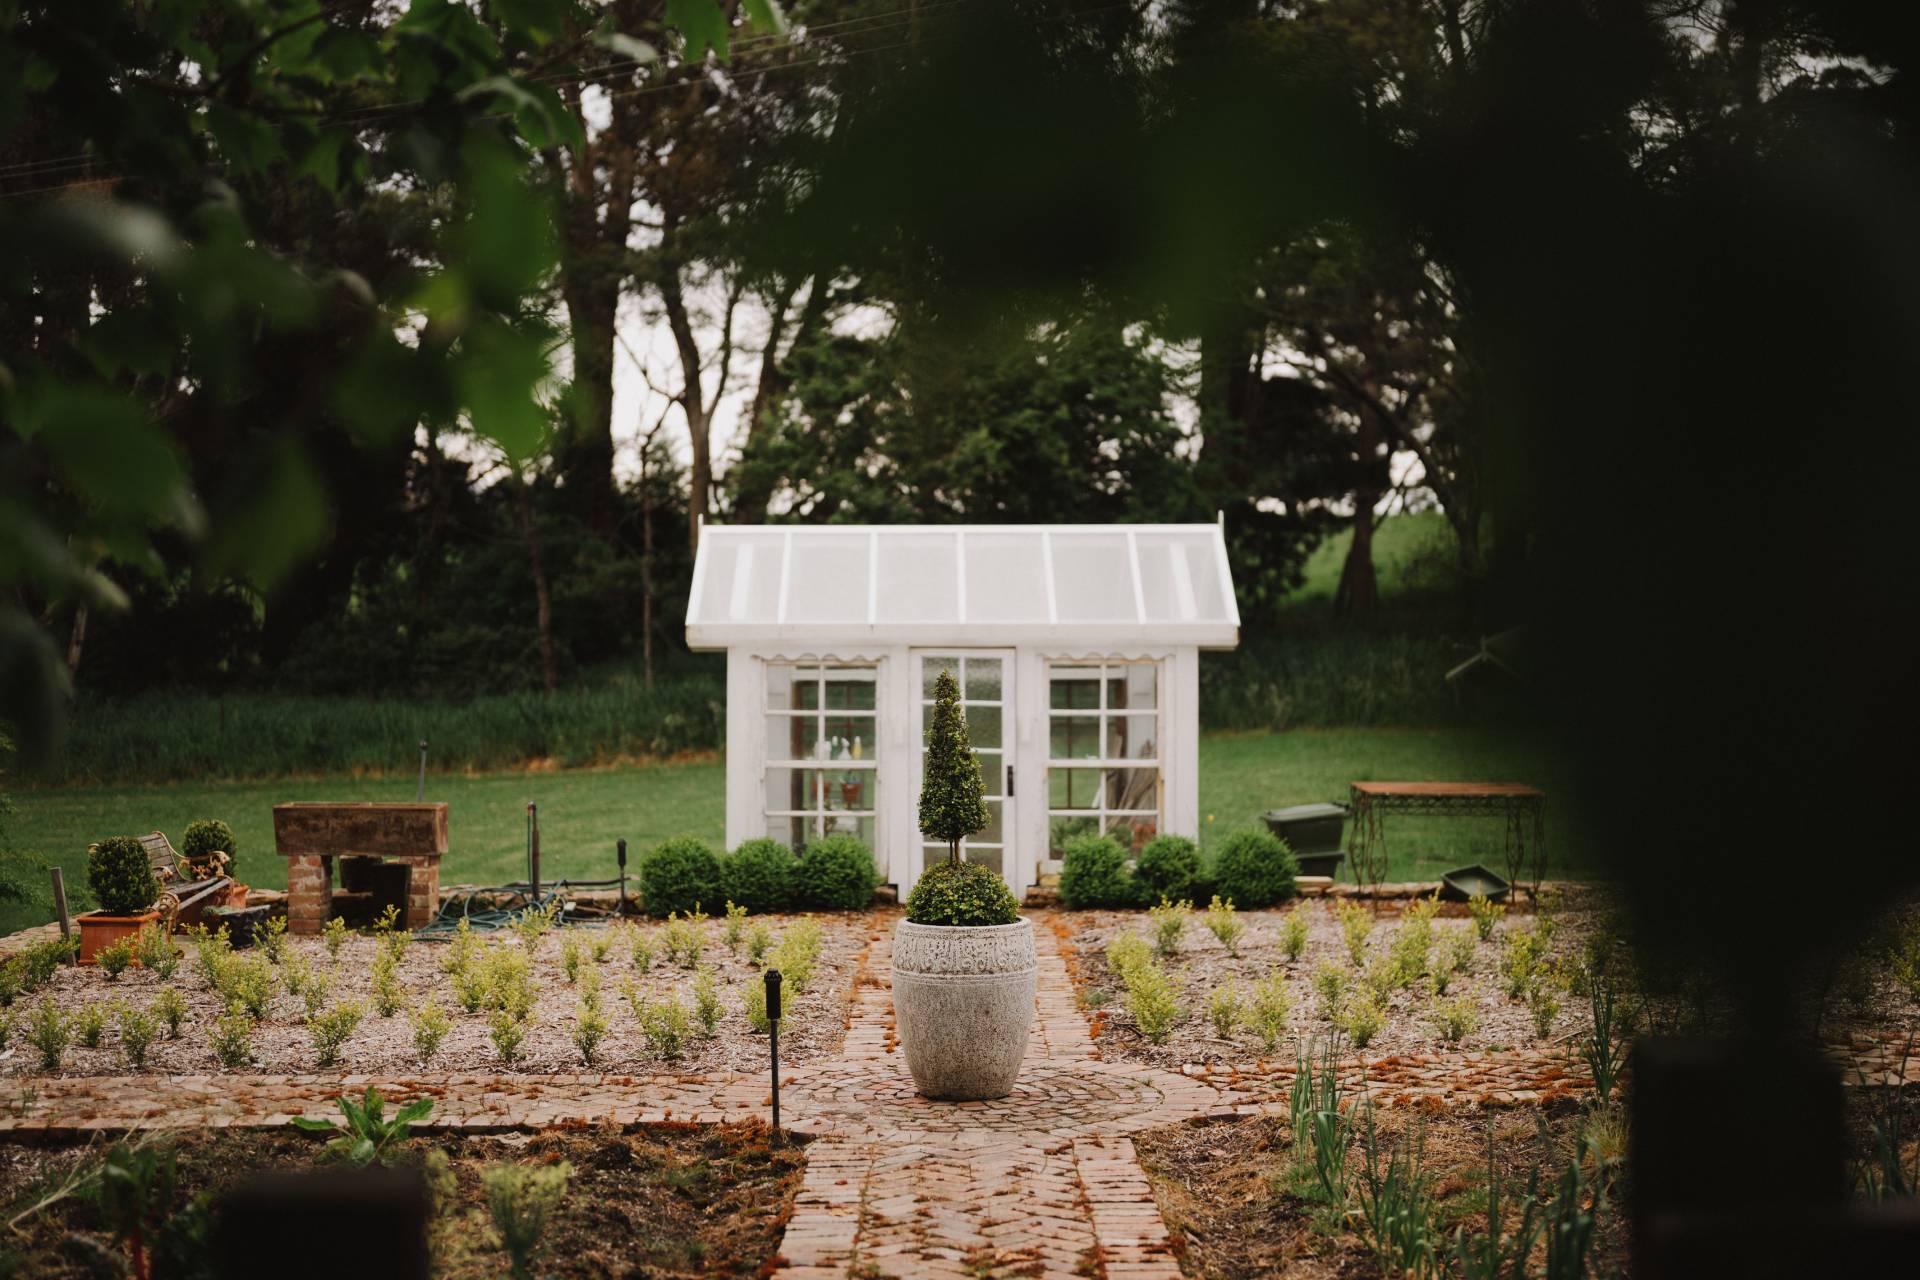 Quaint white greenhouse in a lush vegetable garden, with a brick path leading to it, in a serene rural setting